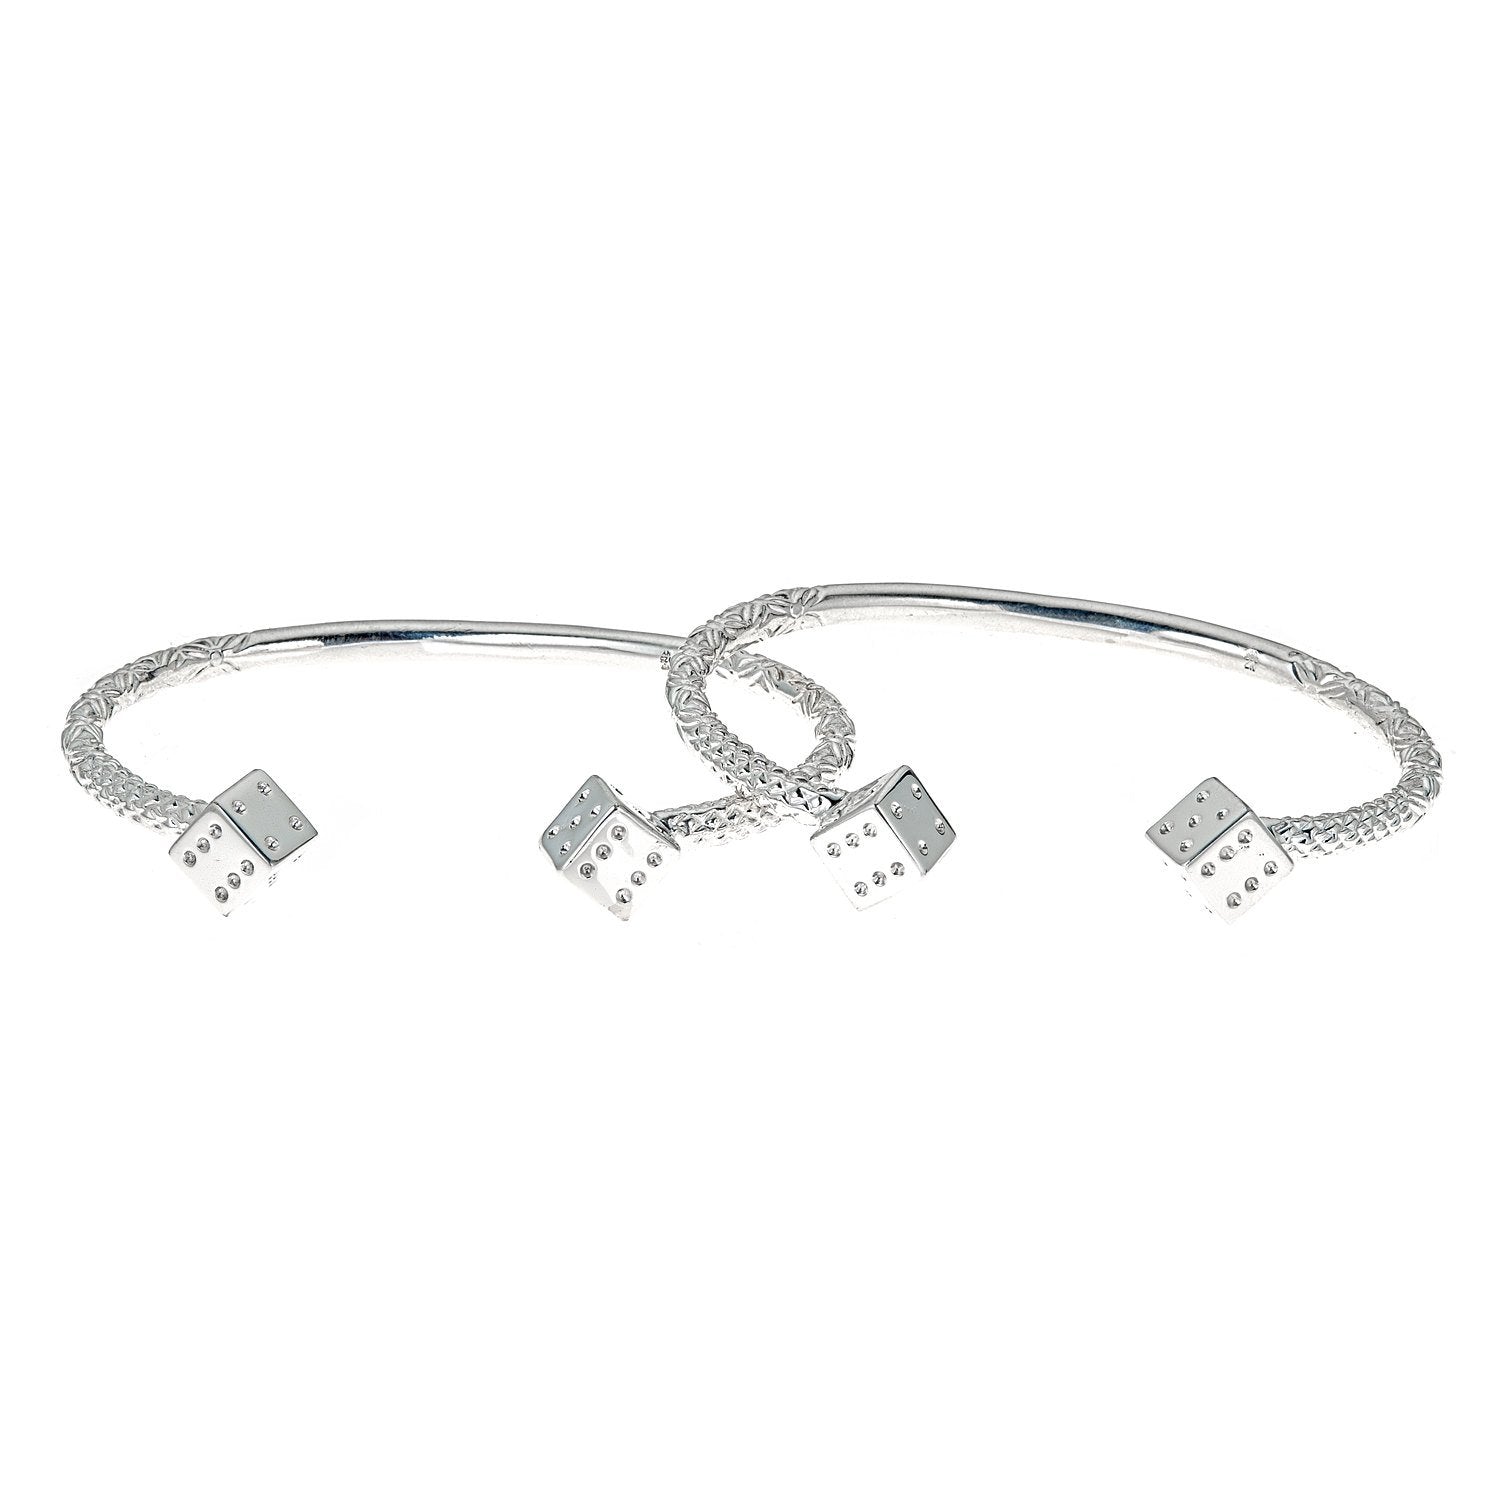 Dice Ends .925 Sterling Silver West Indian Bangles (PAIR 105 grams) - Betterjewelry